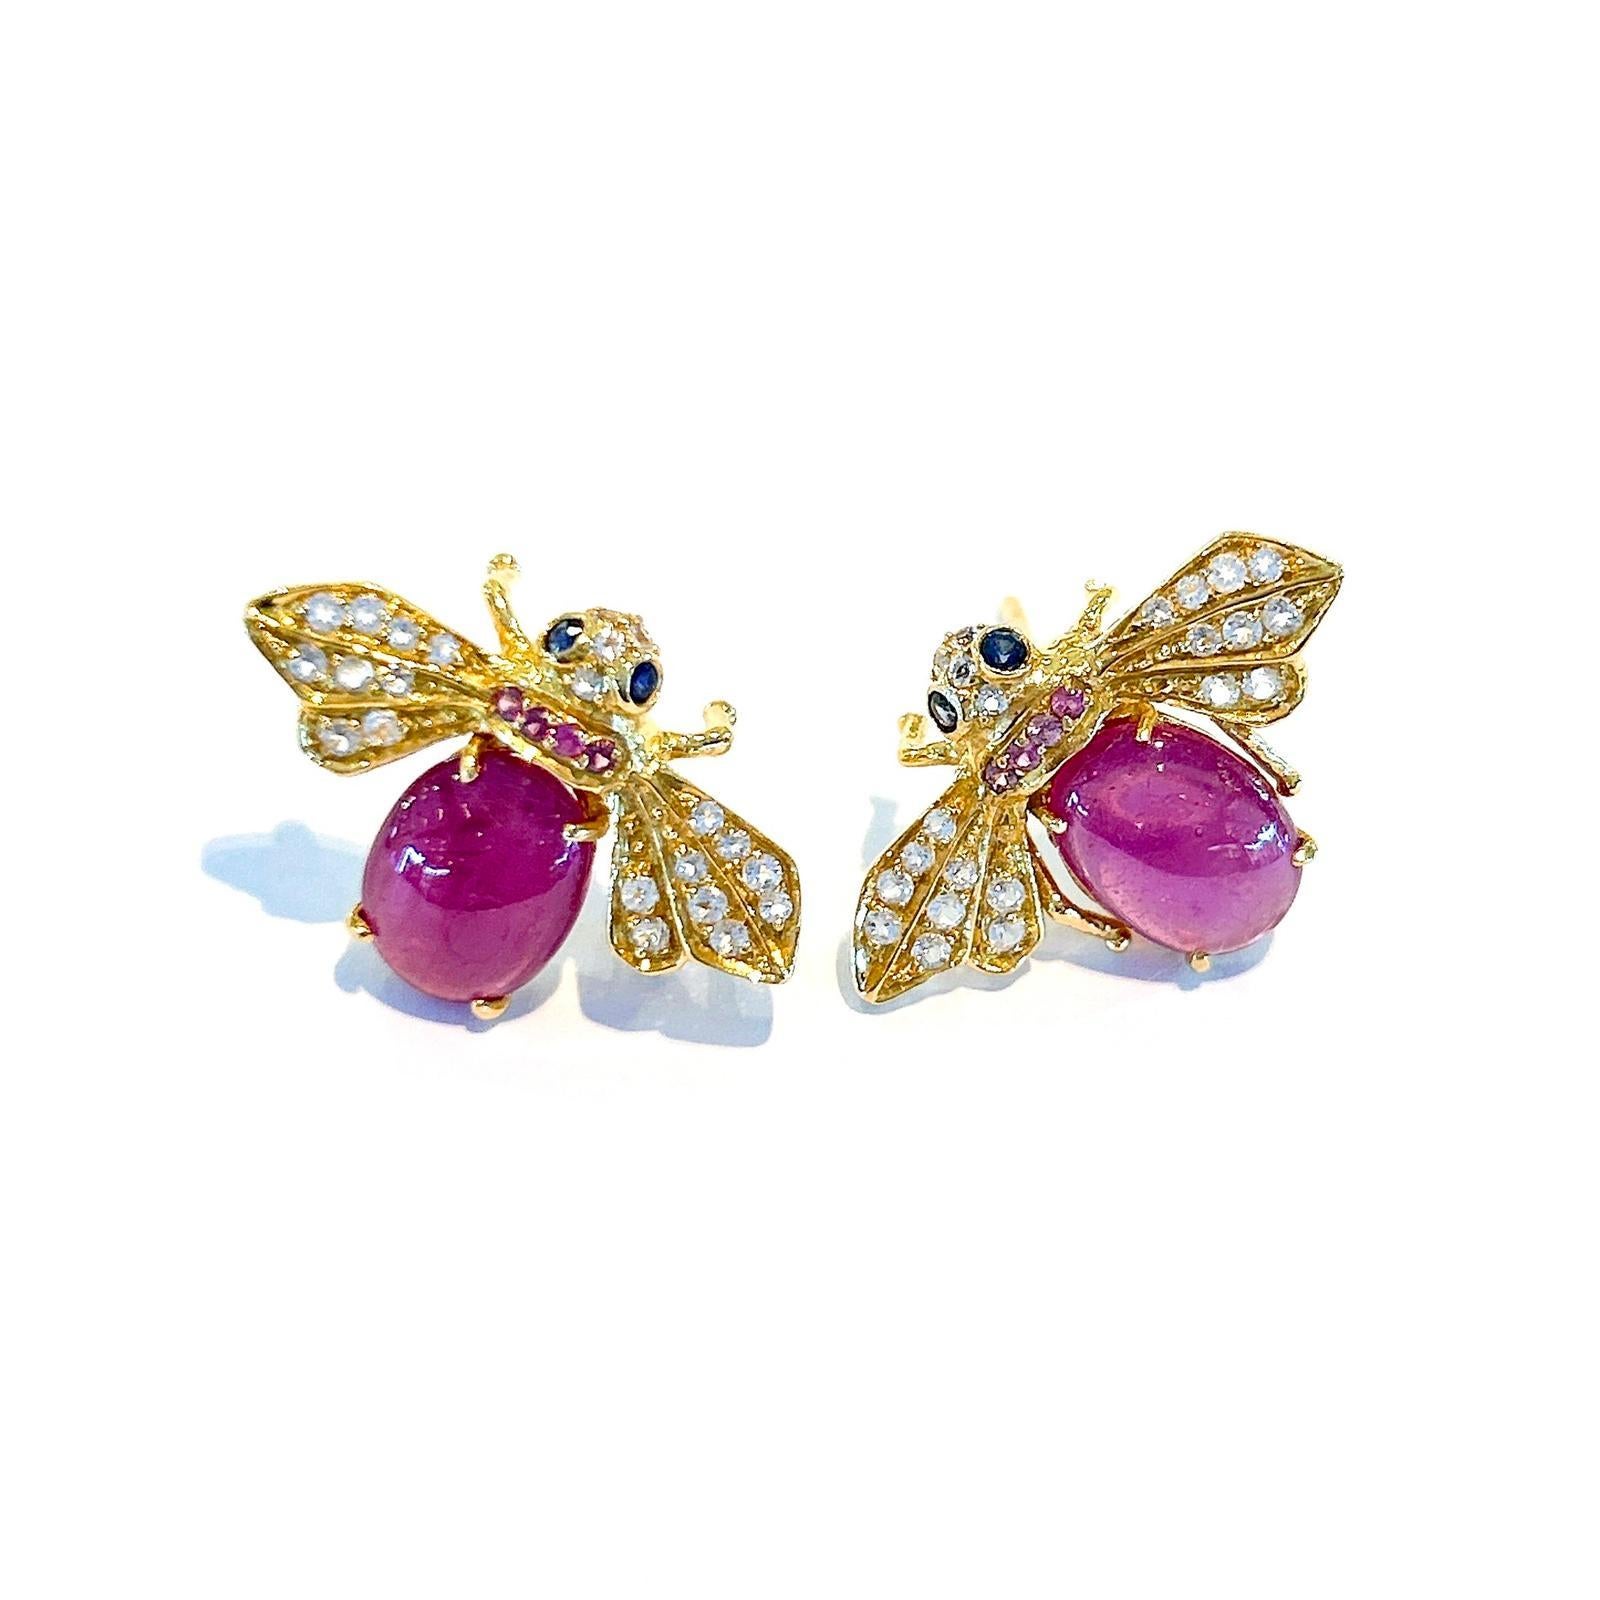 Belle Époque “Orient” Ruby Earrings with White Topaz & Blue Sapphire Set in 22k Gold